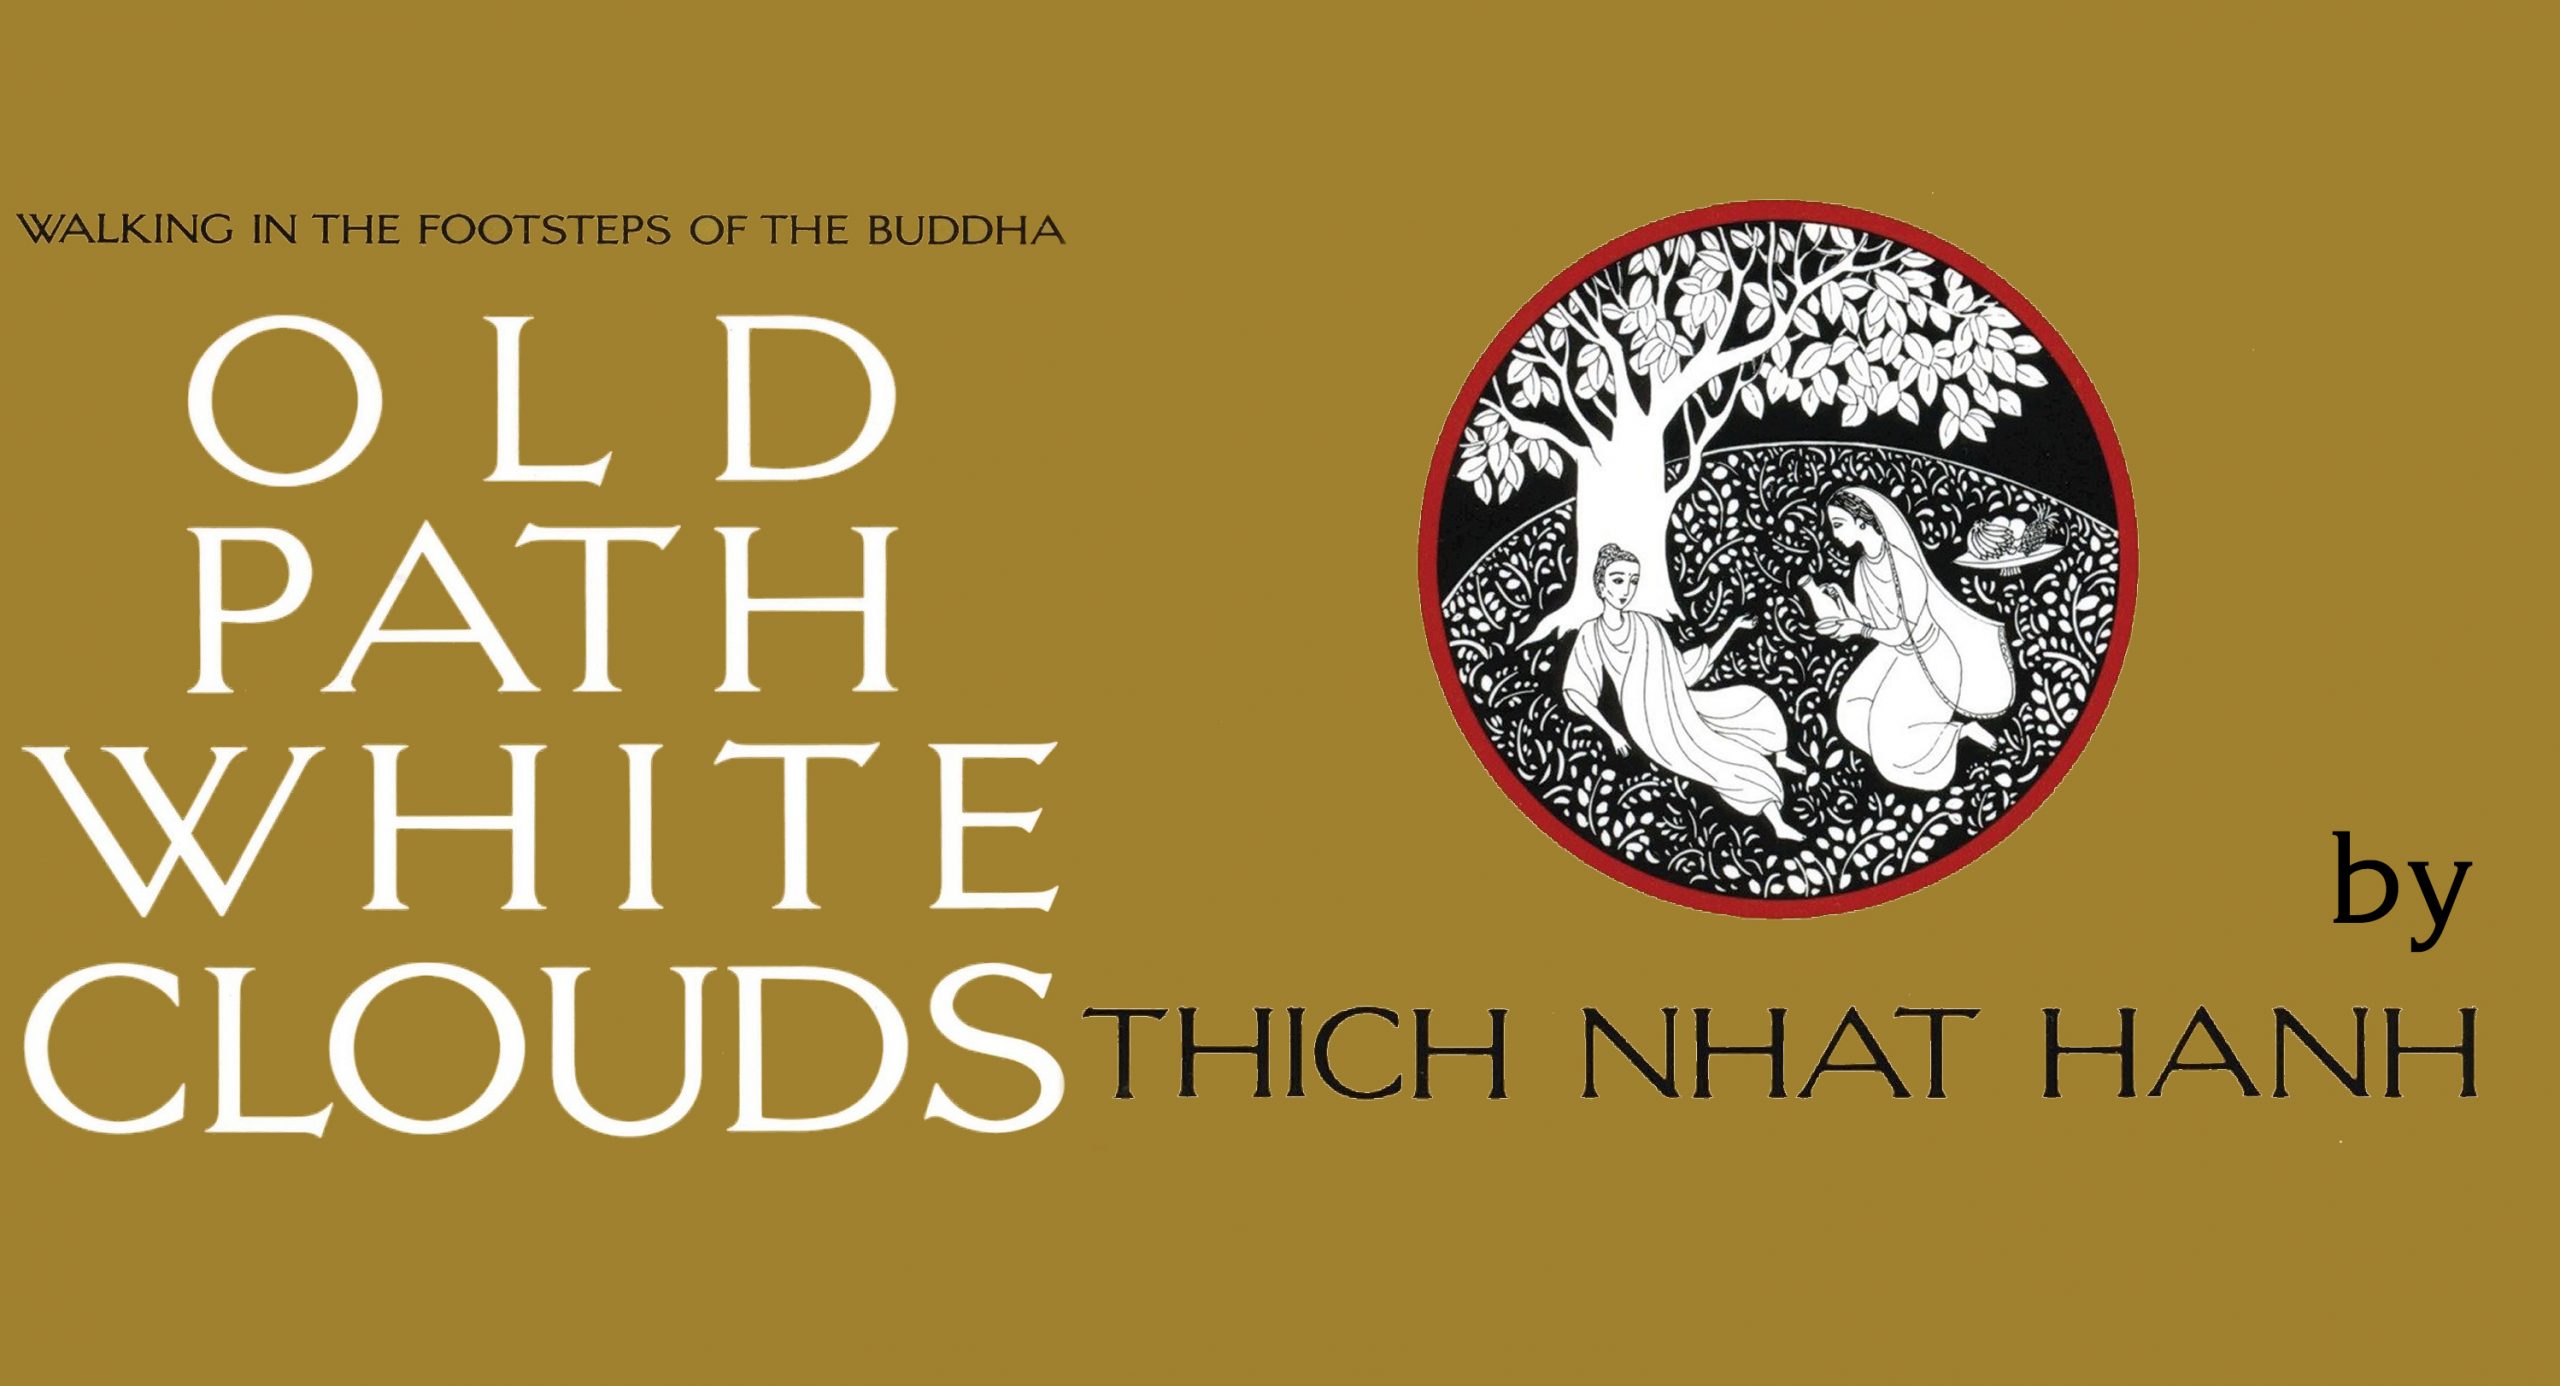 [PDF] Old Path White Clouds by Thich Nhat Hanh – three books